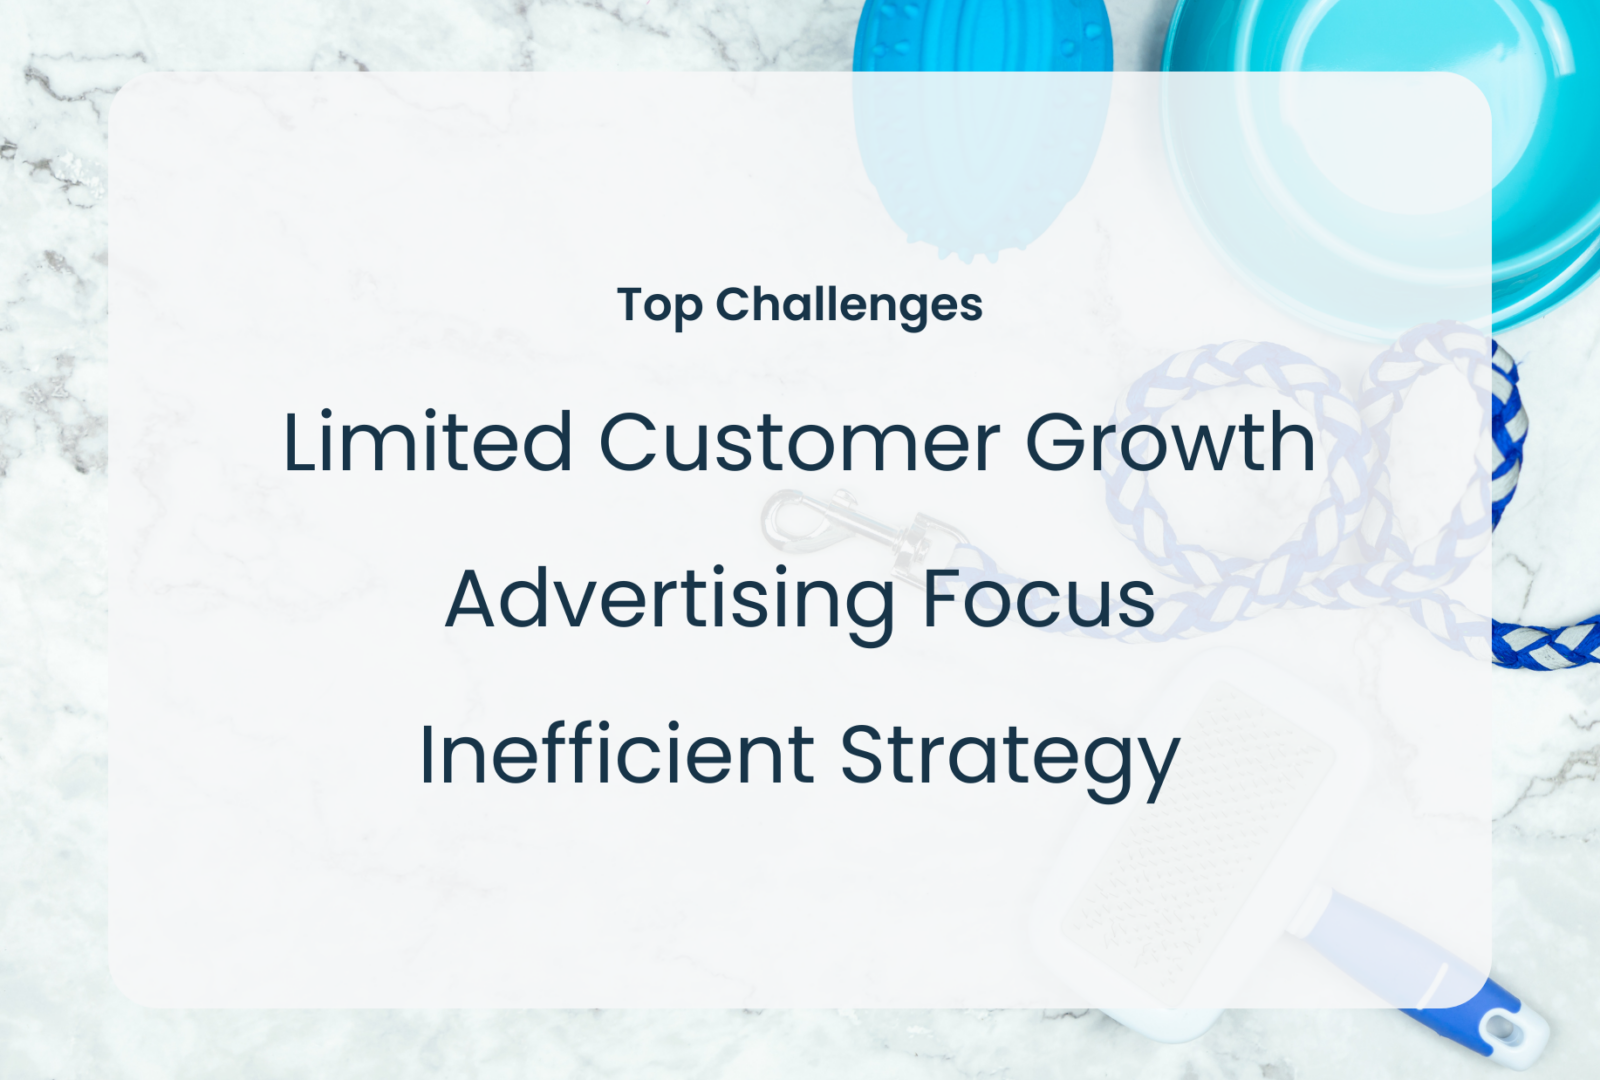 image with text: Top Challenges, Limited customer growth, advertising focus, iinefficient strategy